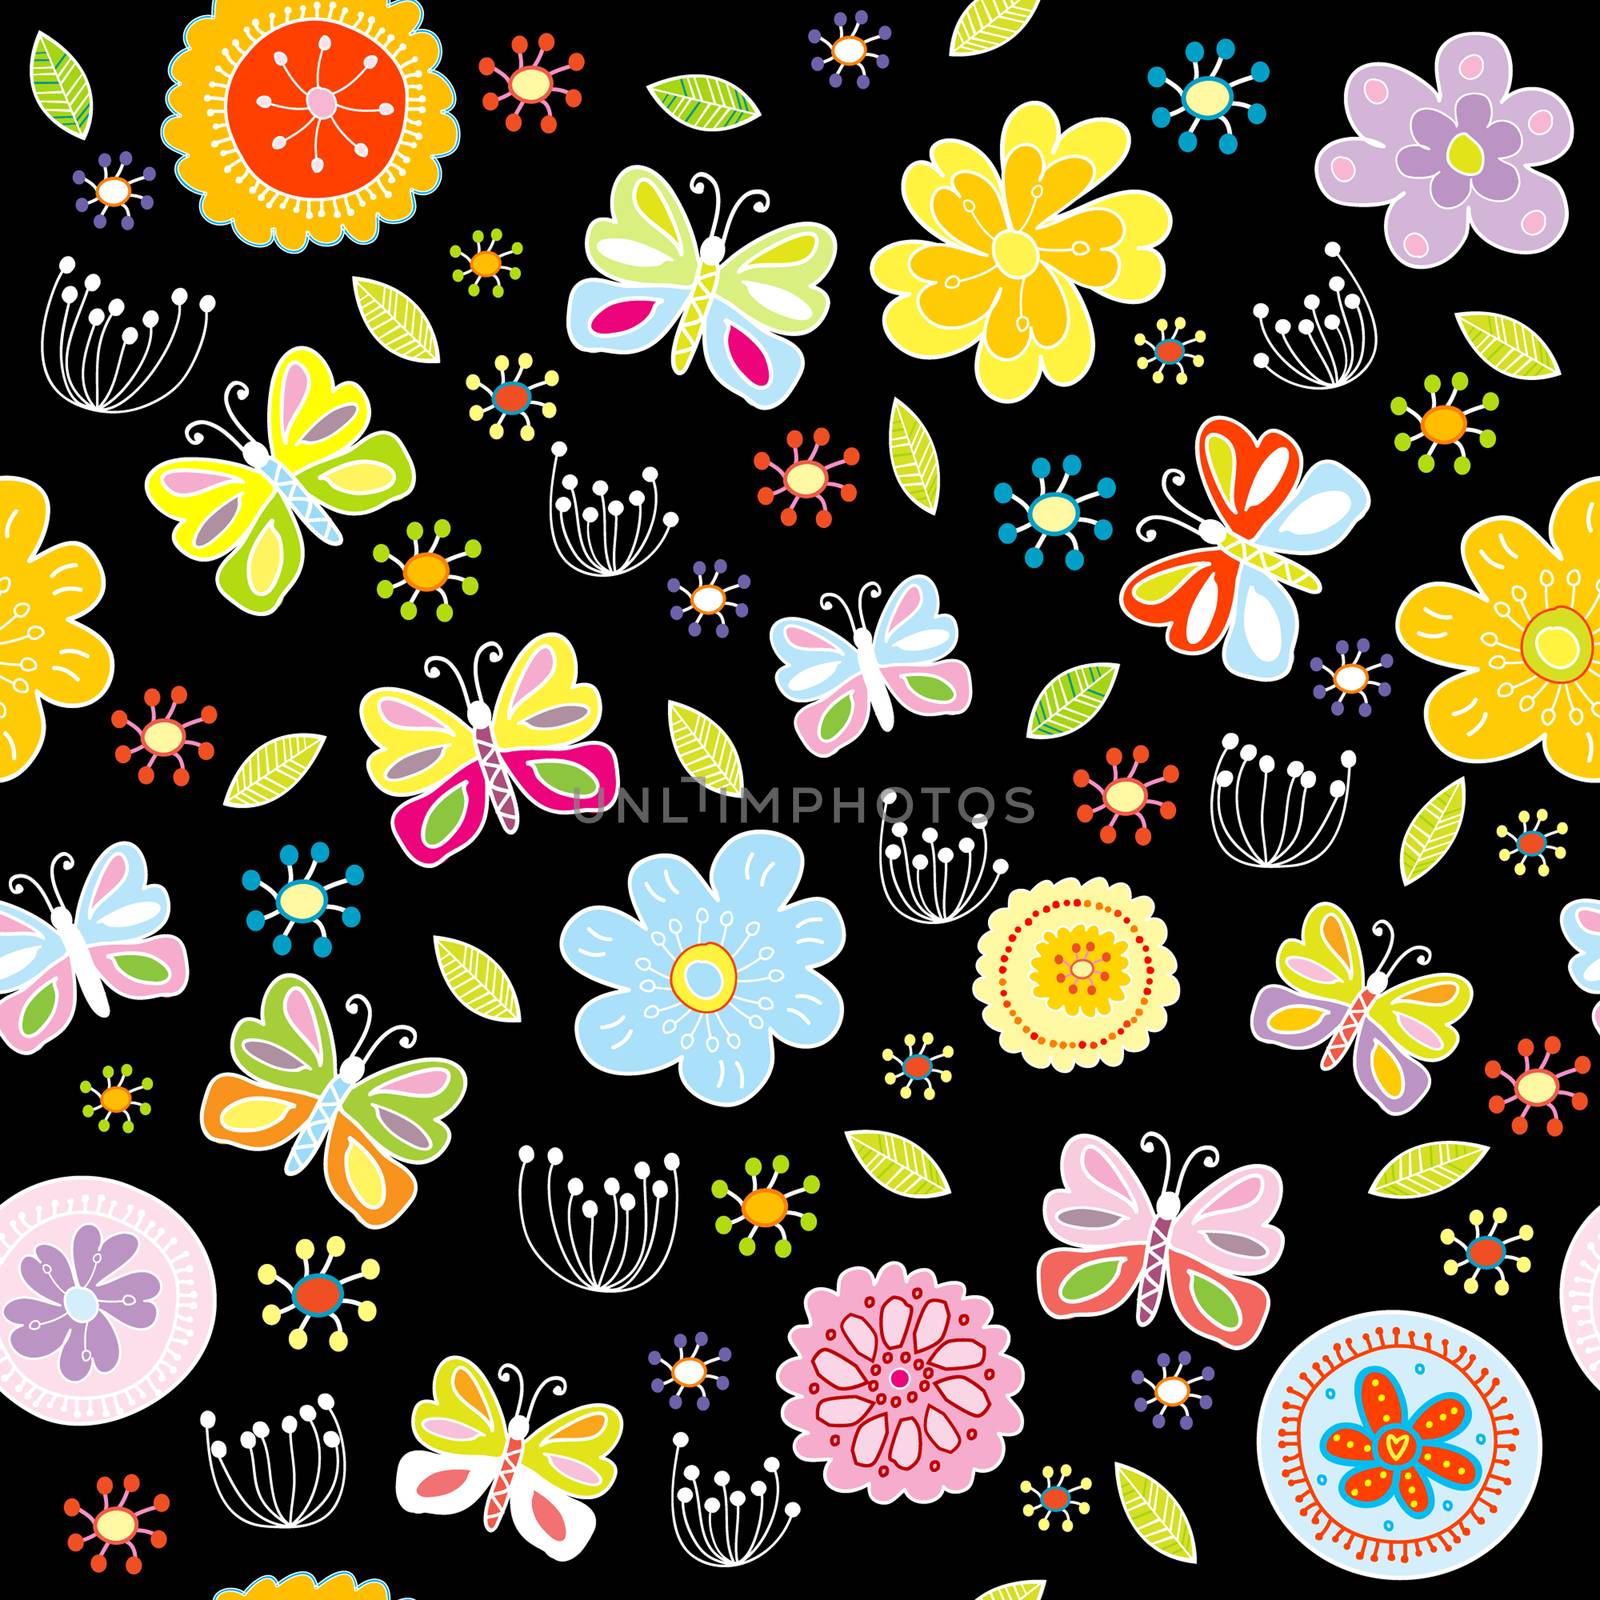 Floral pattern with butterflies on black background